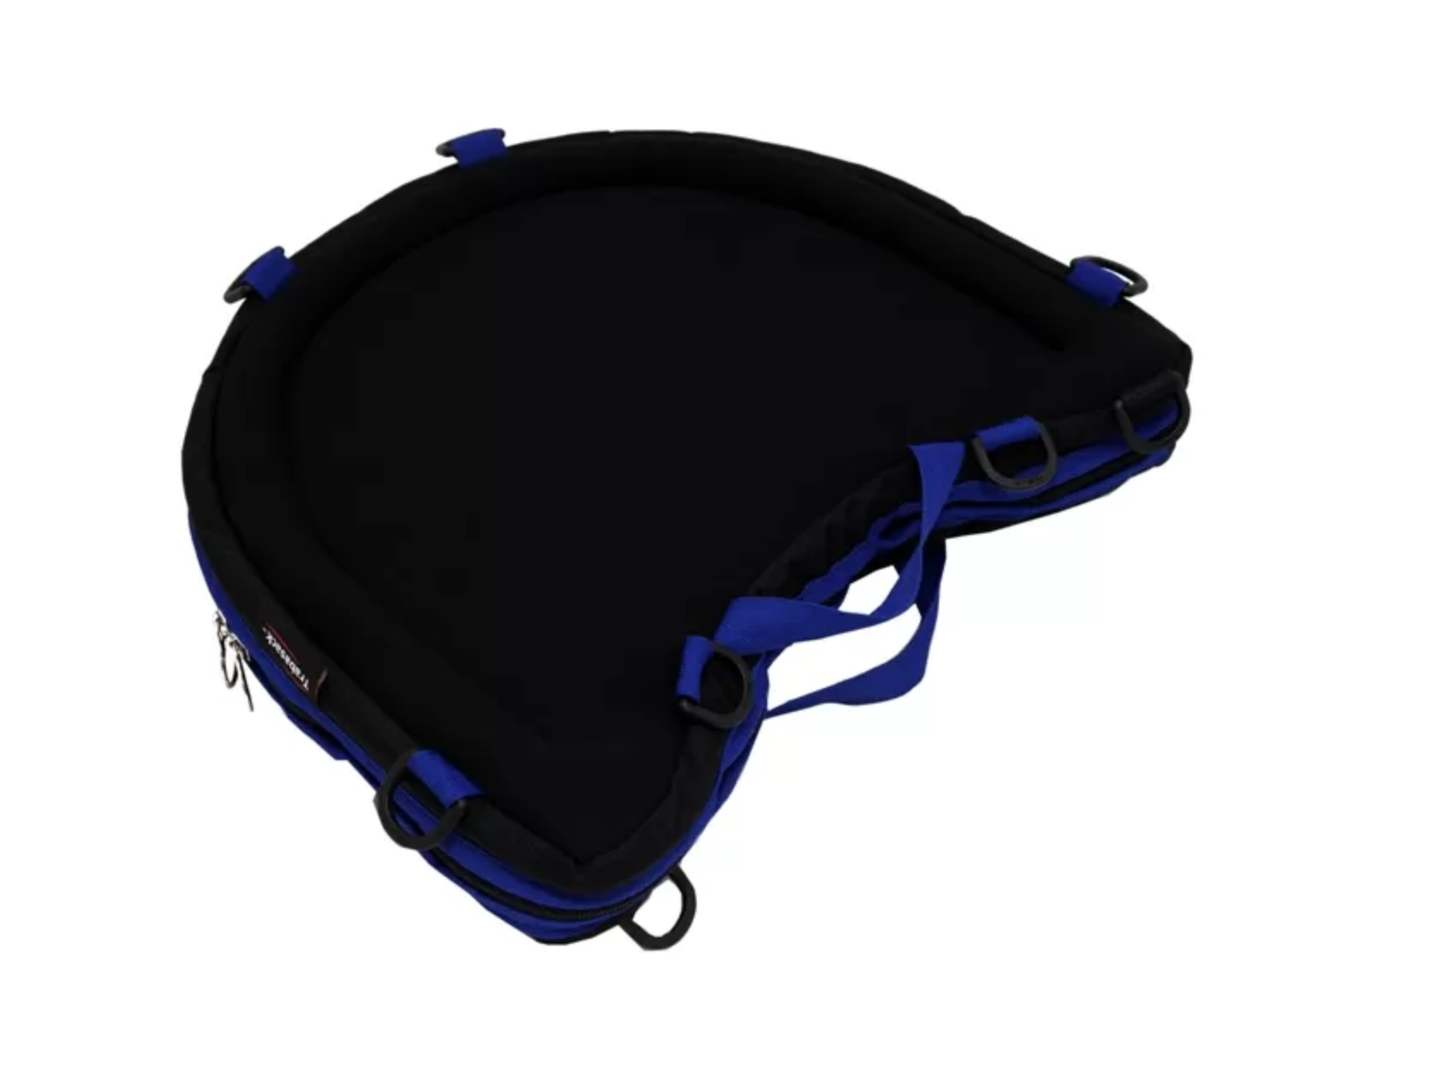 Trabasack Curve Connect - Wheelchair Lap Tray & Bag